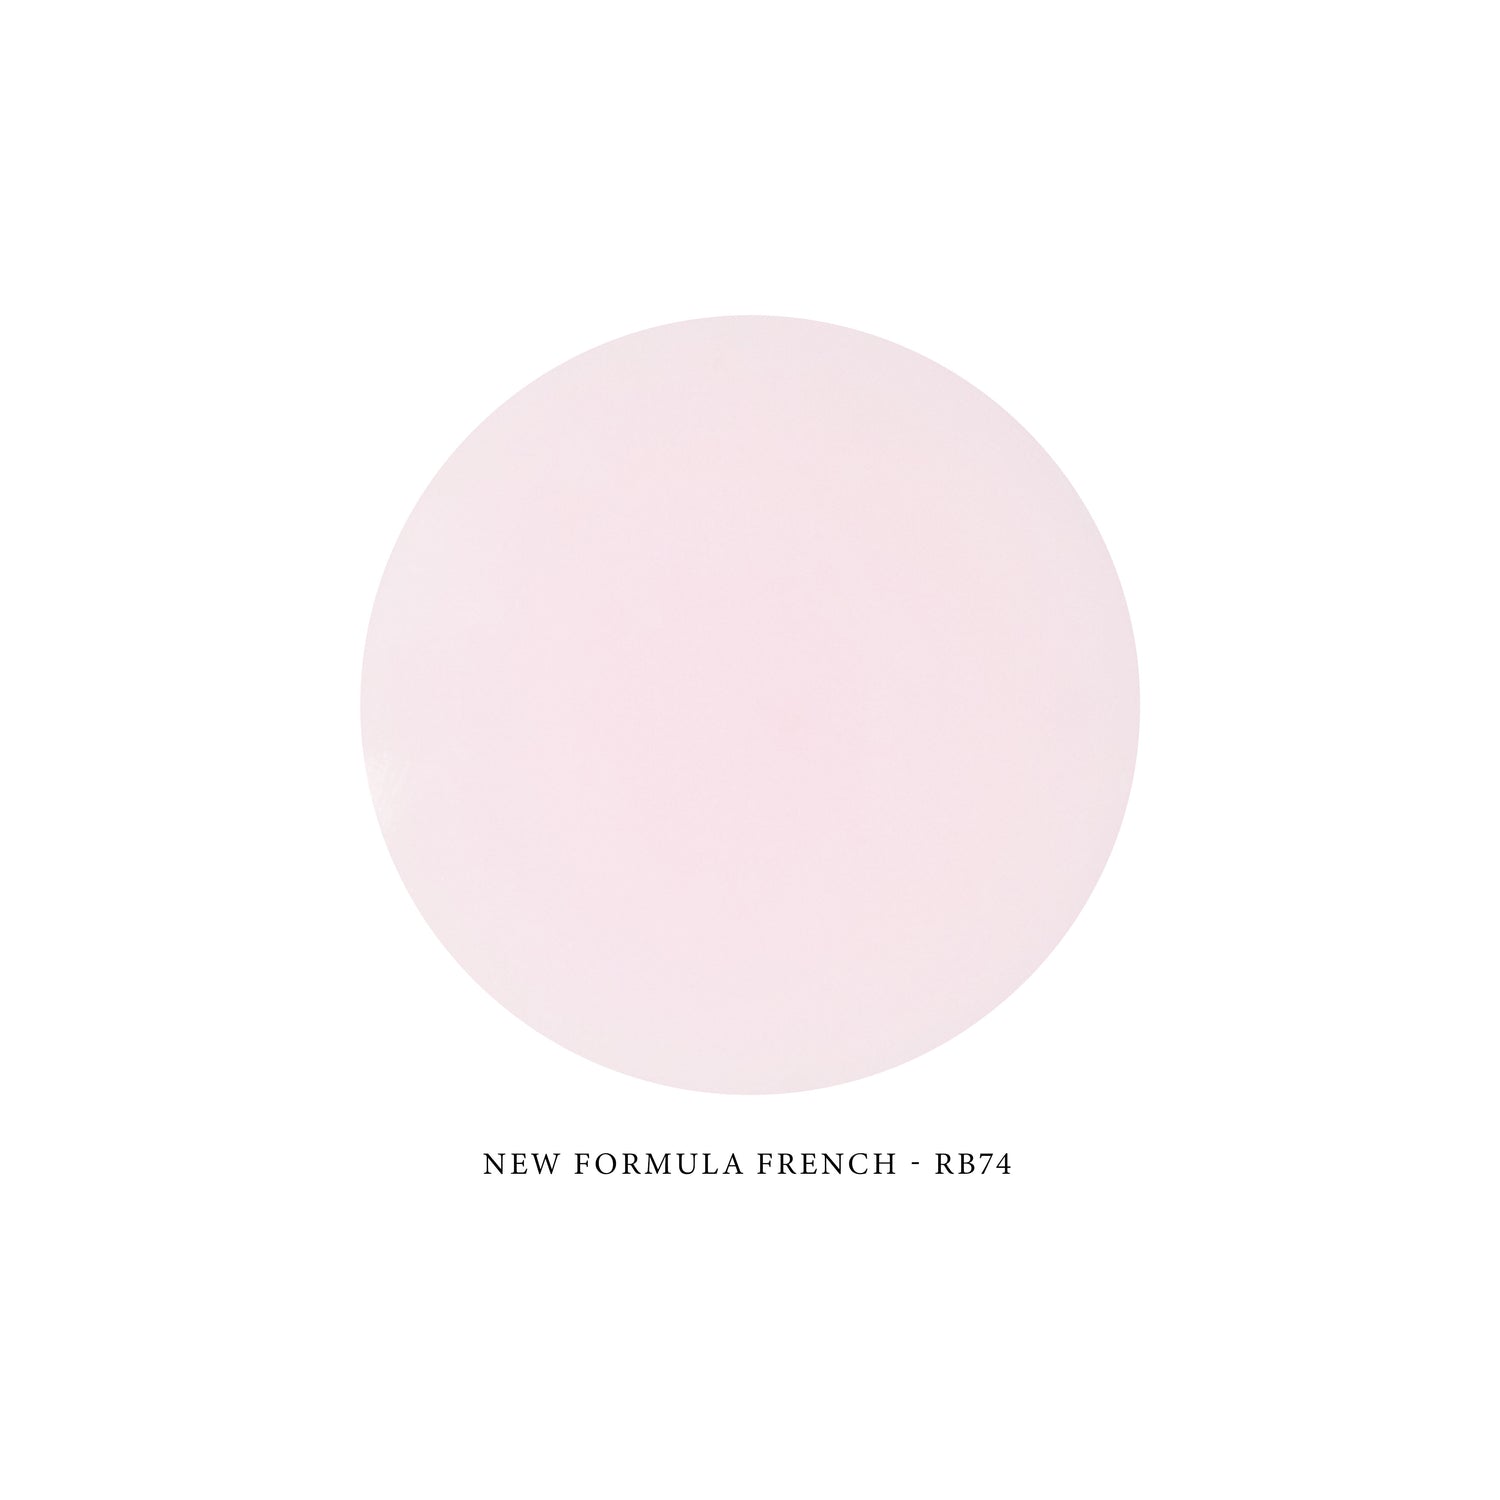 NEW FORMULA French Rubber Base RB74 - PALE PINK